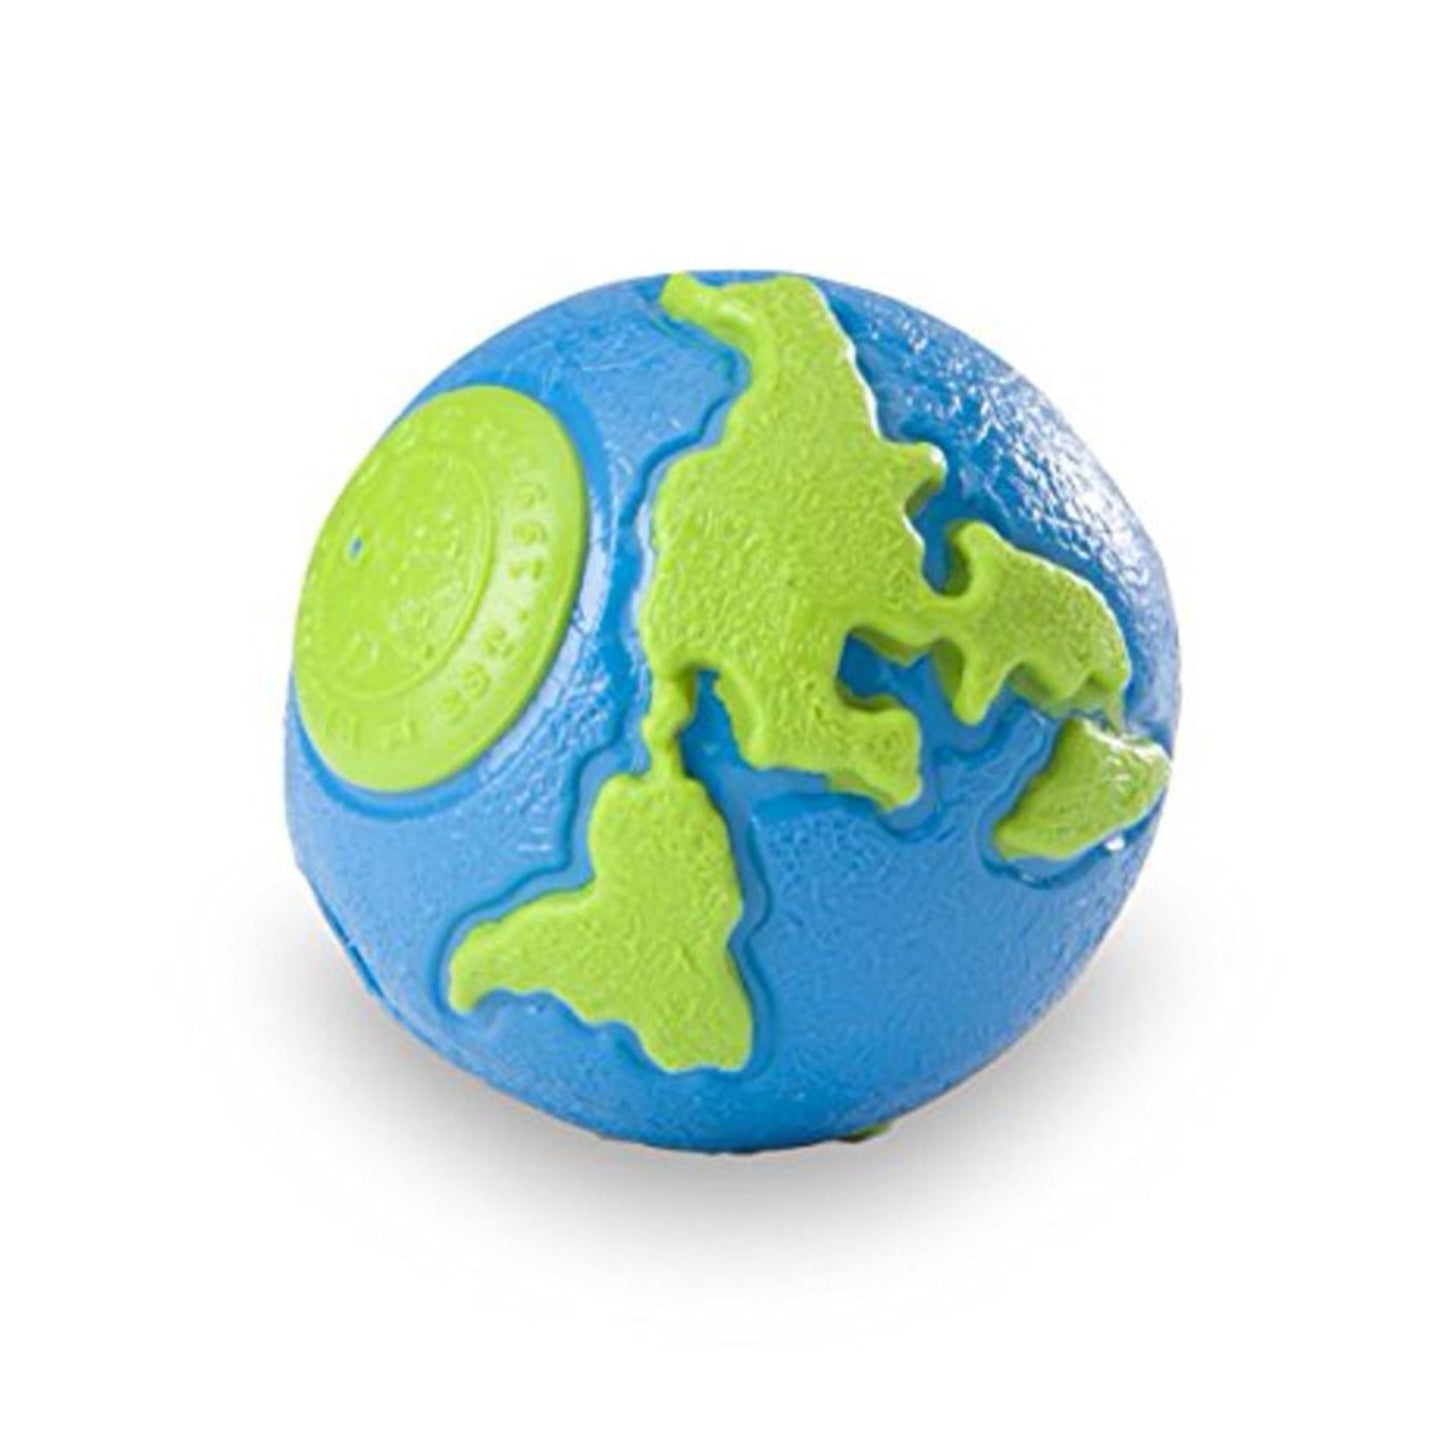 Petstages Planet Dog Orbee-Tuff Planet Ball Dog Toy/Green, Blue/Green, Small